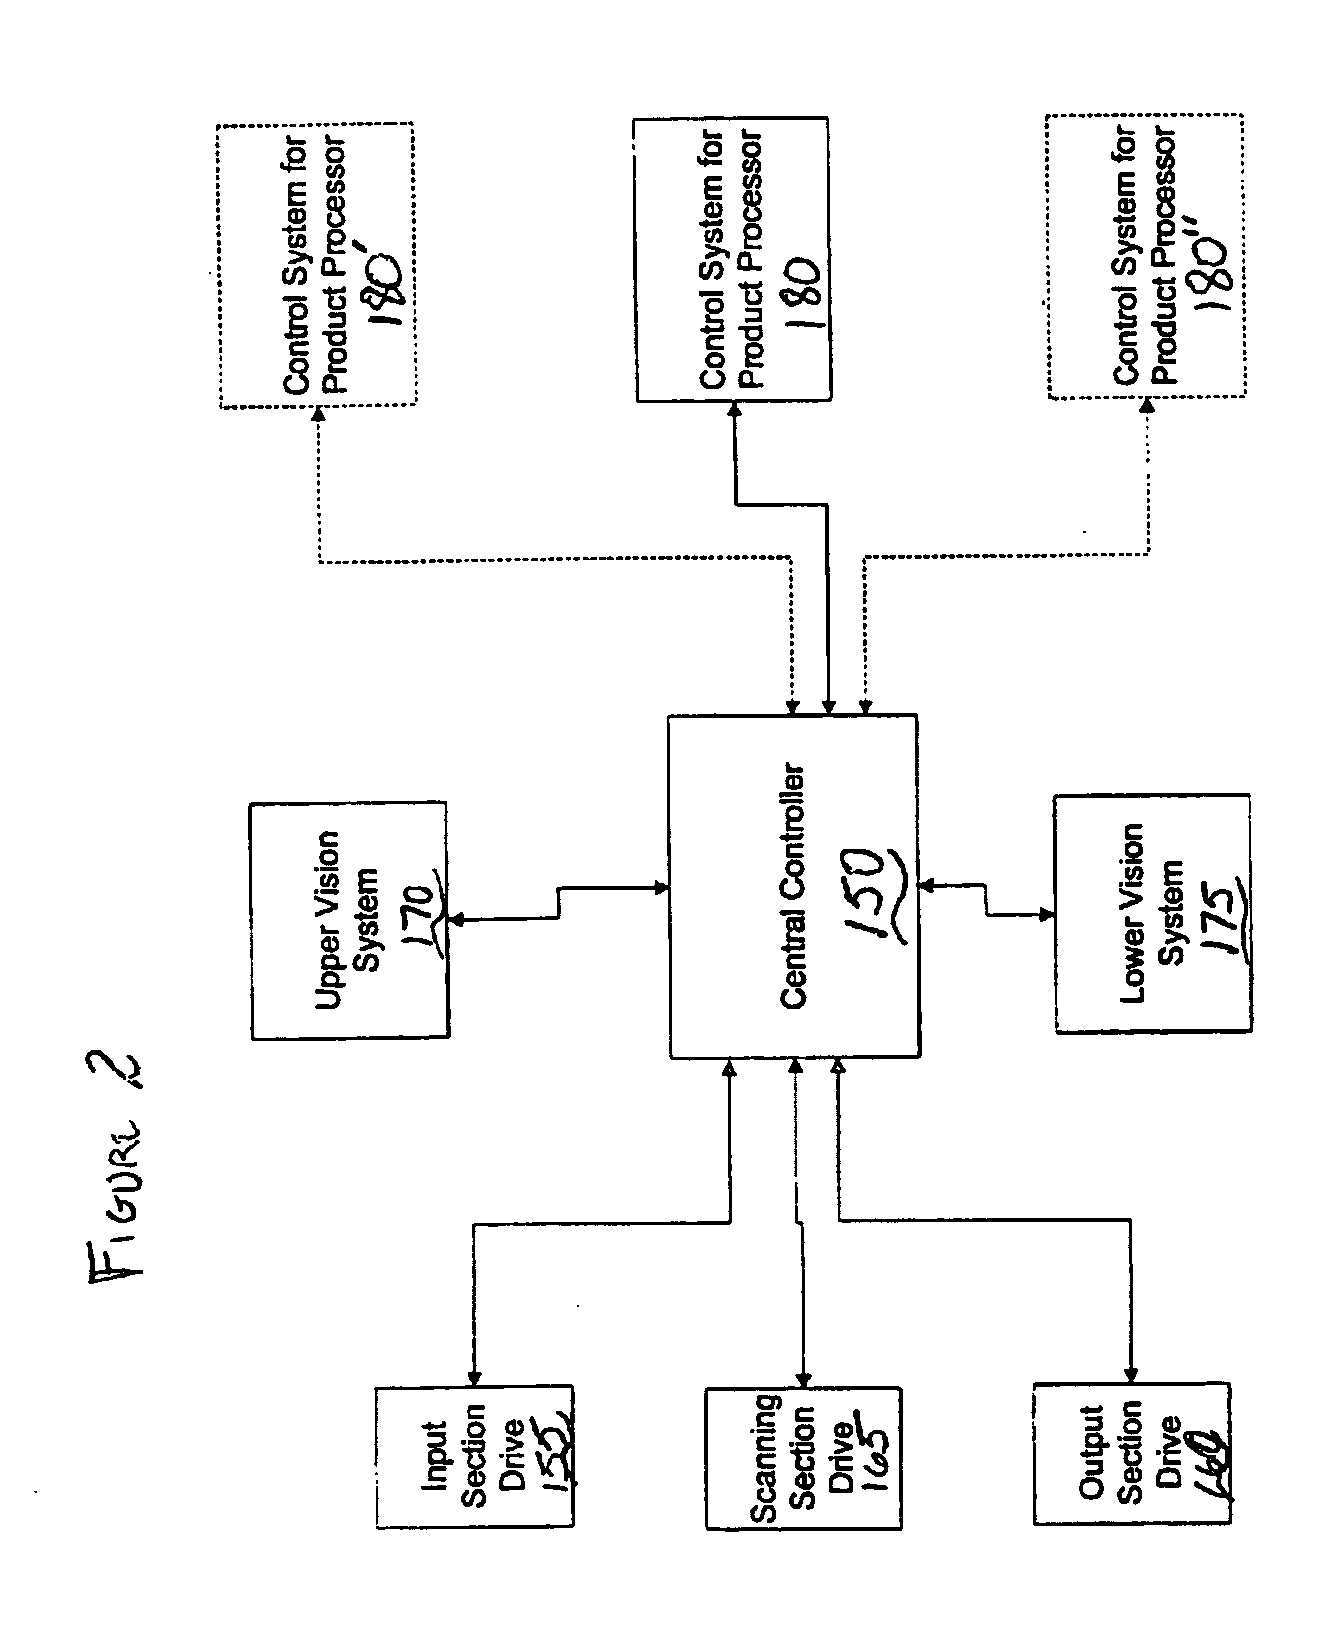 Automated product profiling apparatus and product slicing system using same